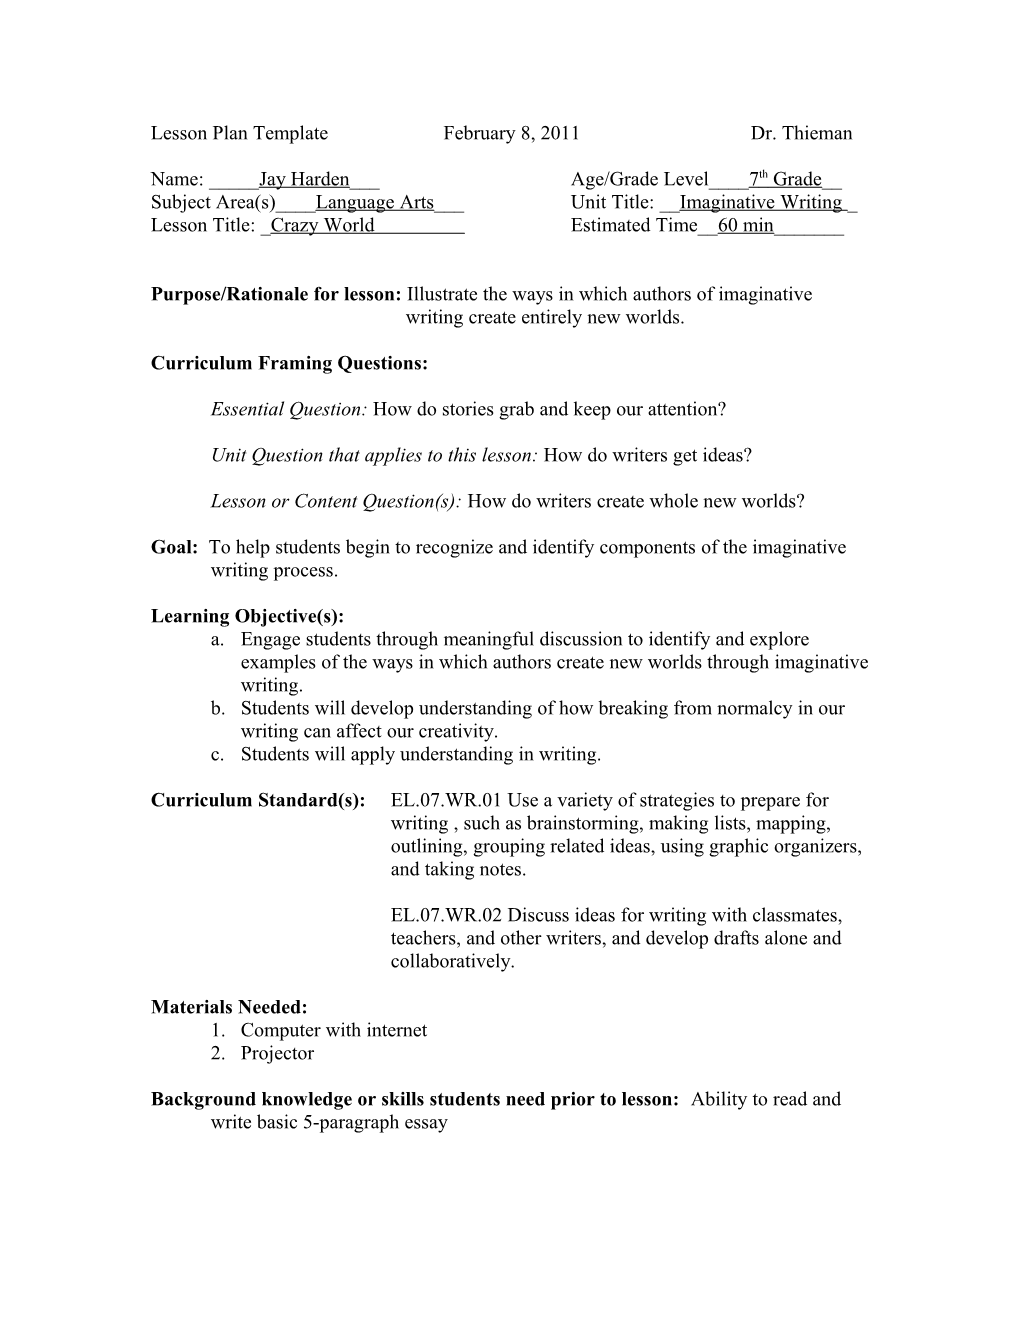 Lesson Plan Template s35